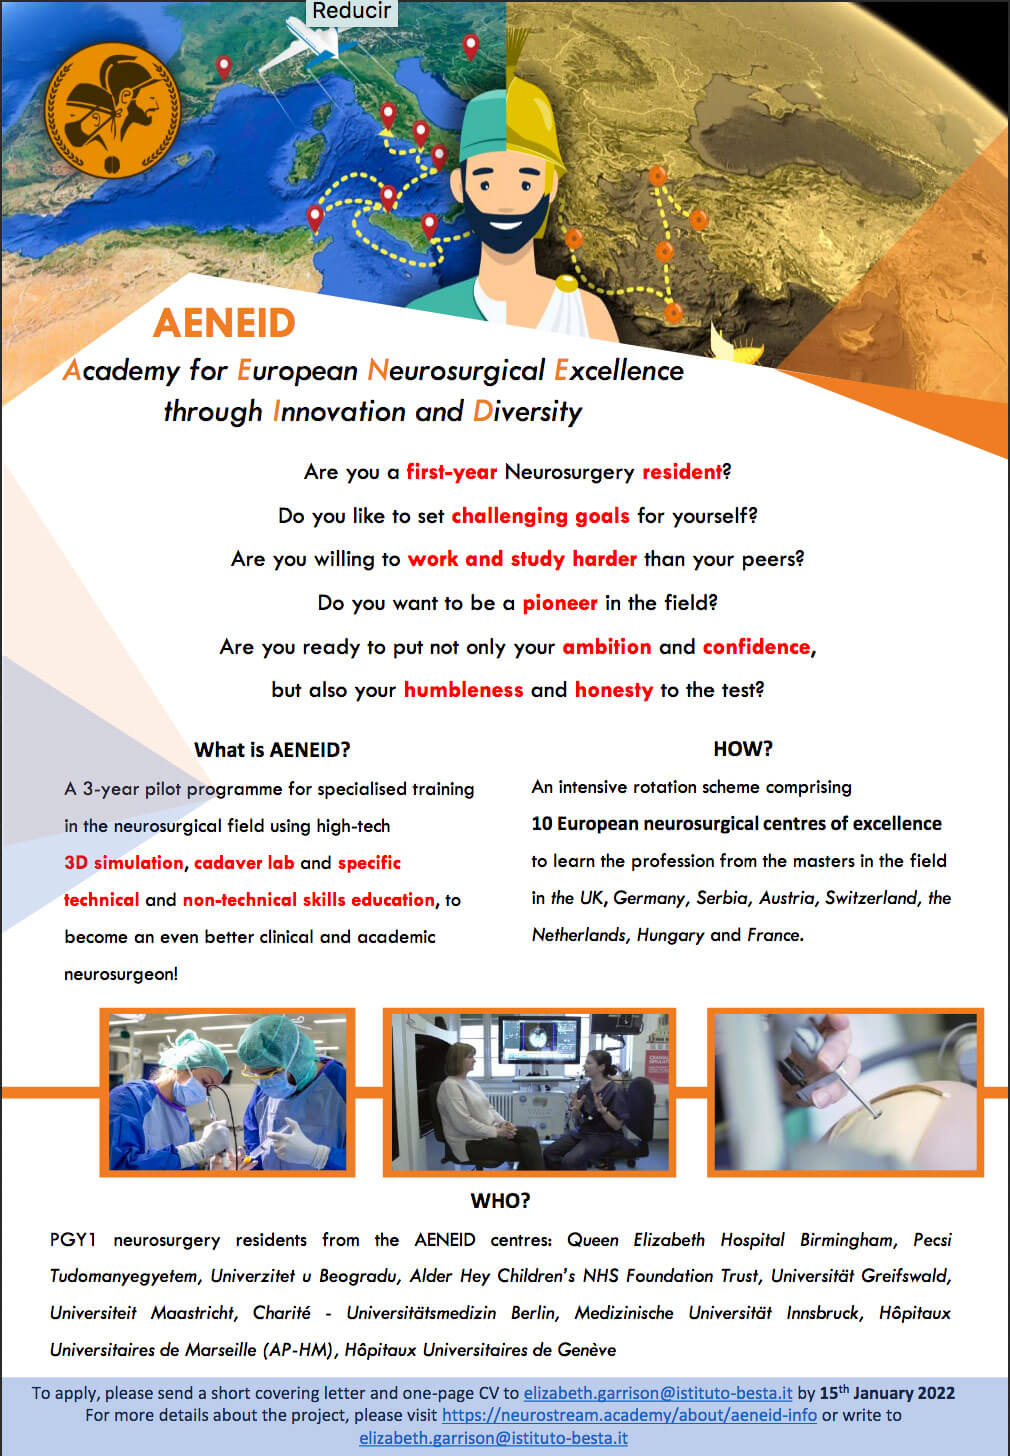 Last call to apply for the AENEID Programme